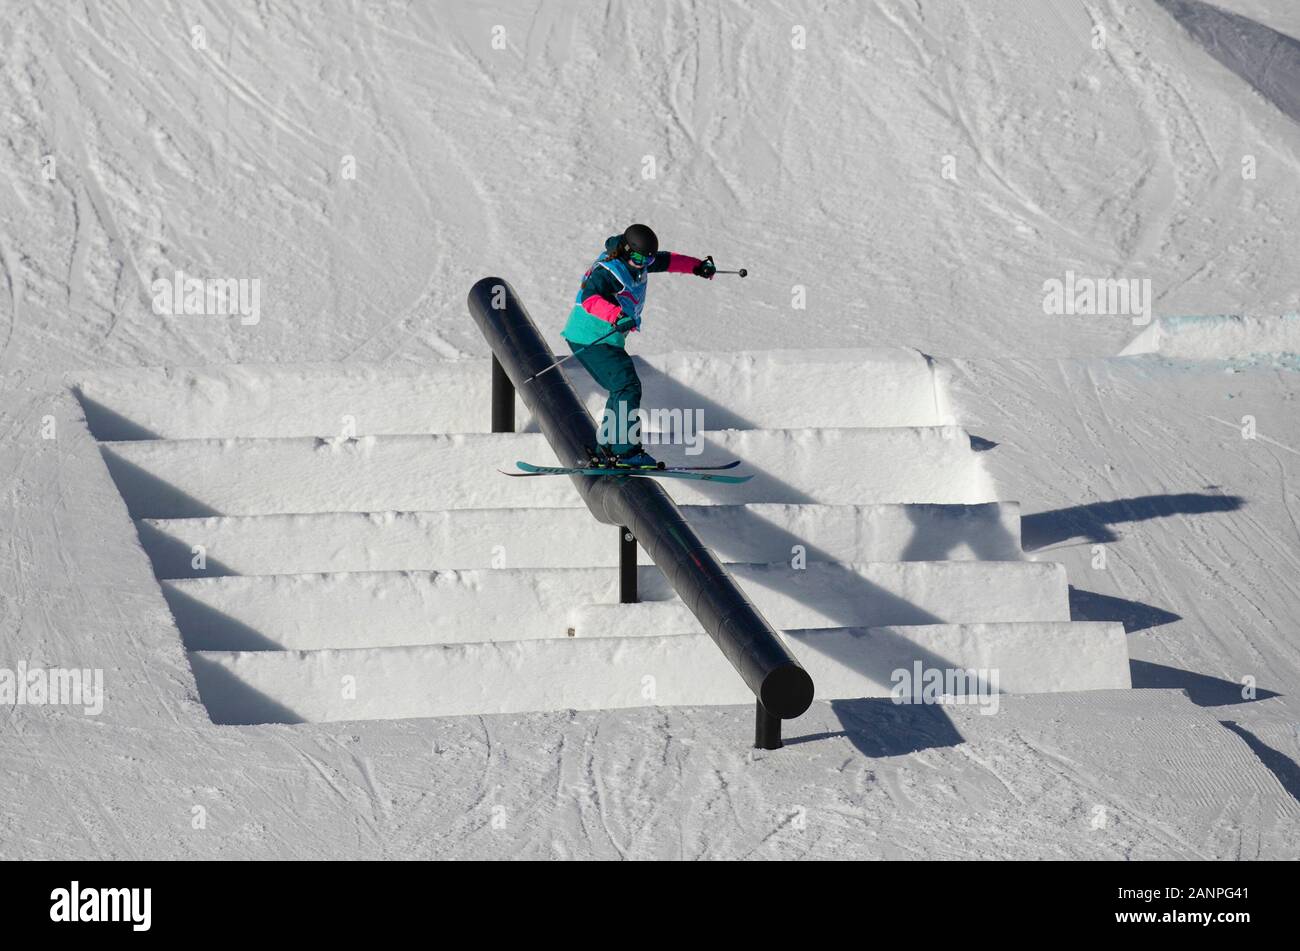 Team GB’s Kirsty Muir (15) during freeski slopestyle training at the Lausanne 2020 Youth Olympic Games on the 16h January 2020 at Leysin Park & Pipe Stock Photo